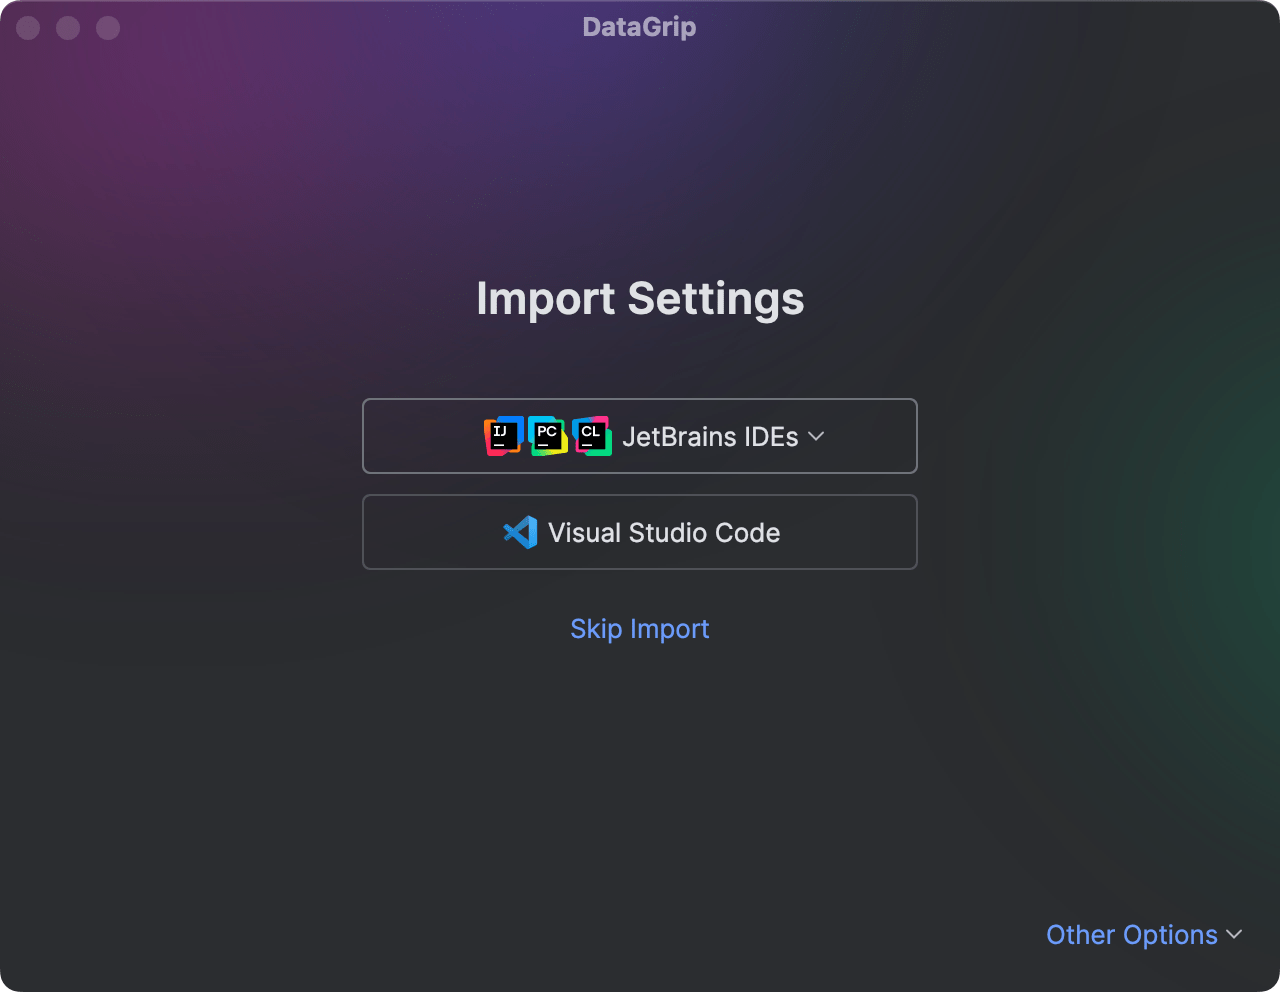 The Import Settings dialog with the cursor on the Visual Studio Code button